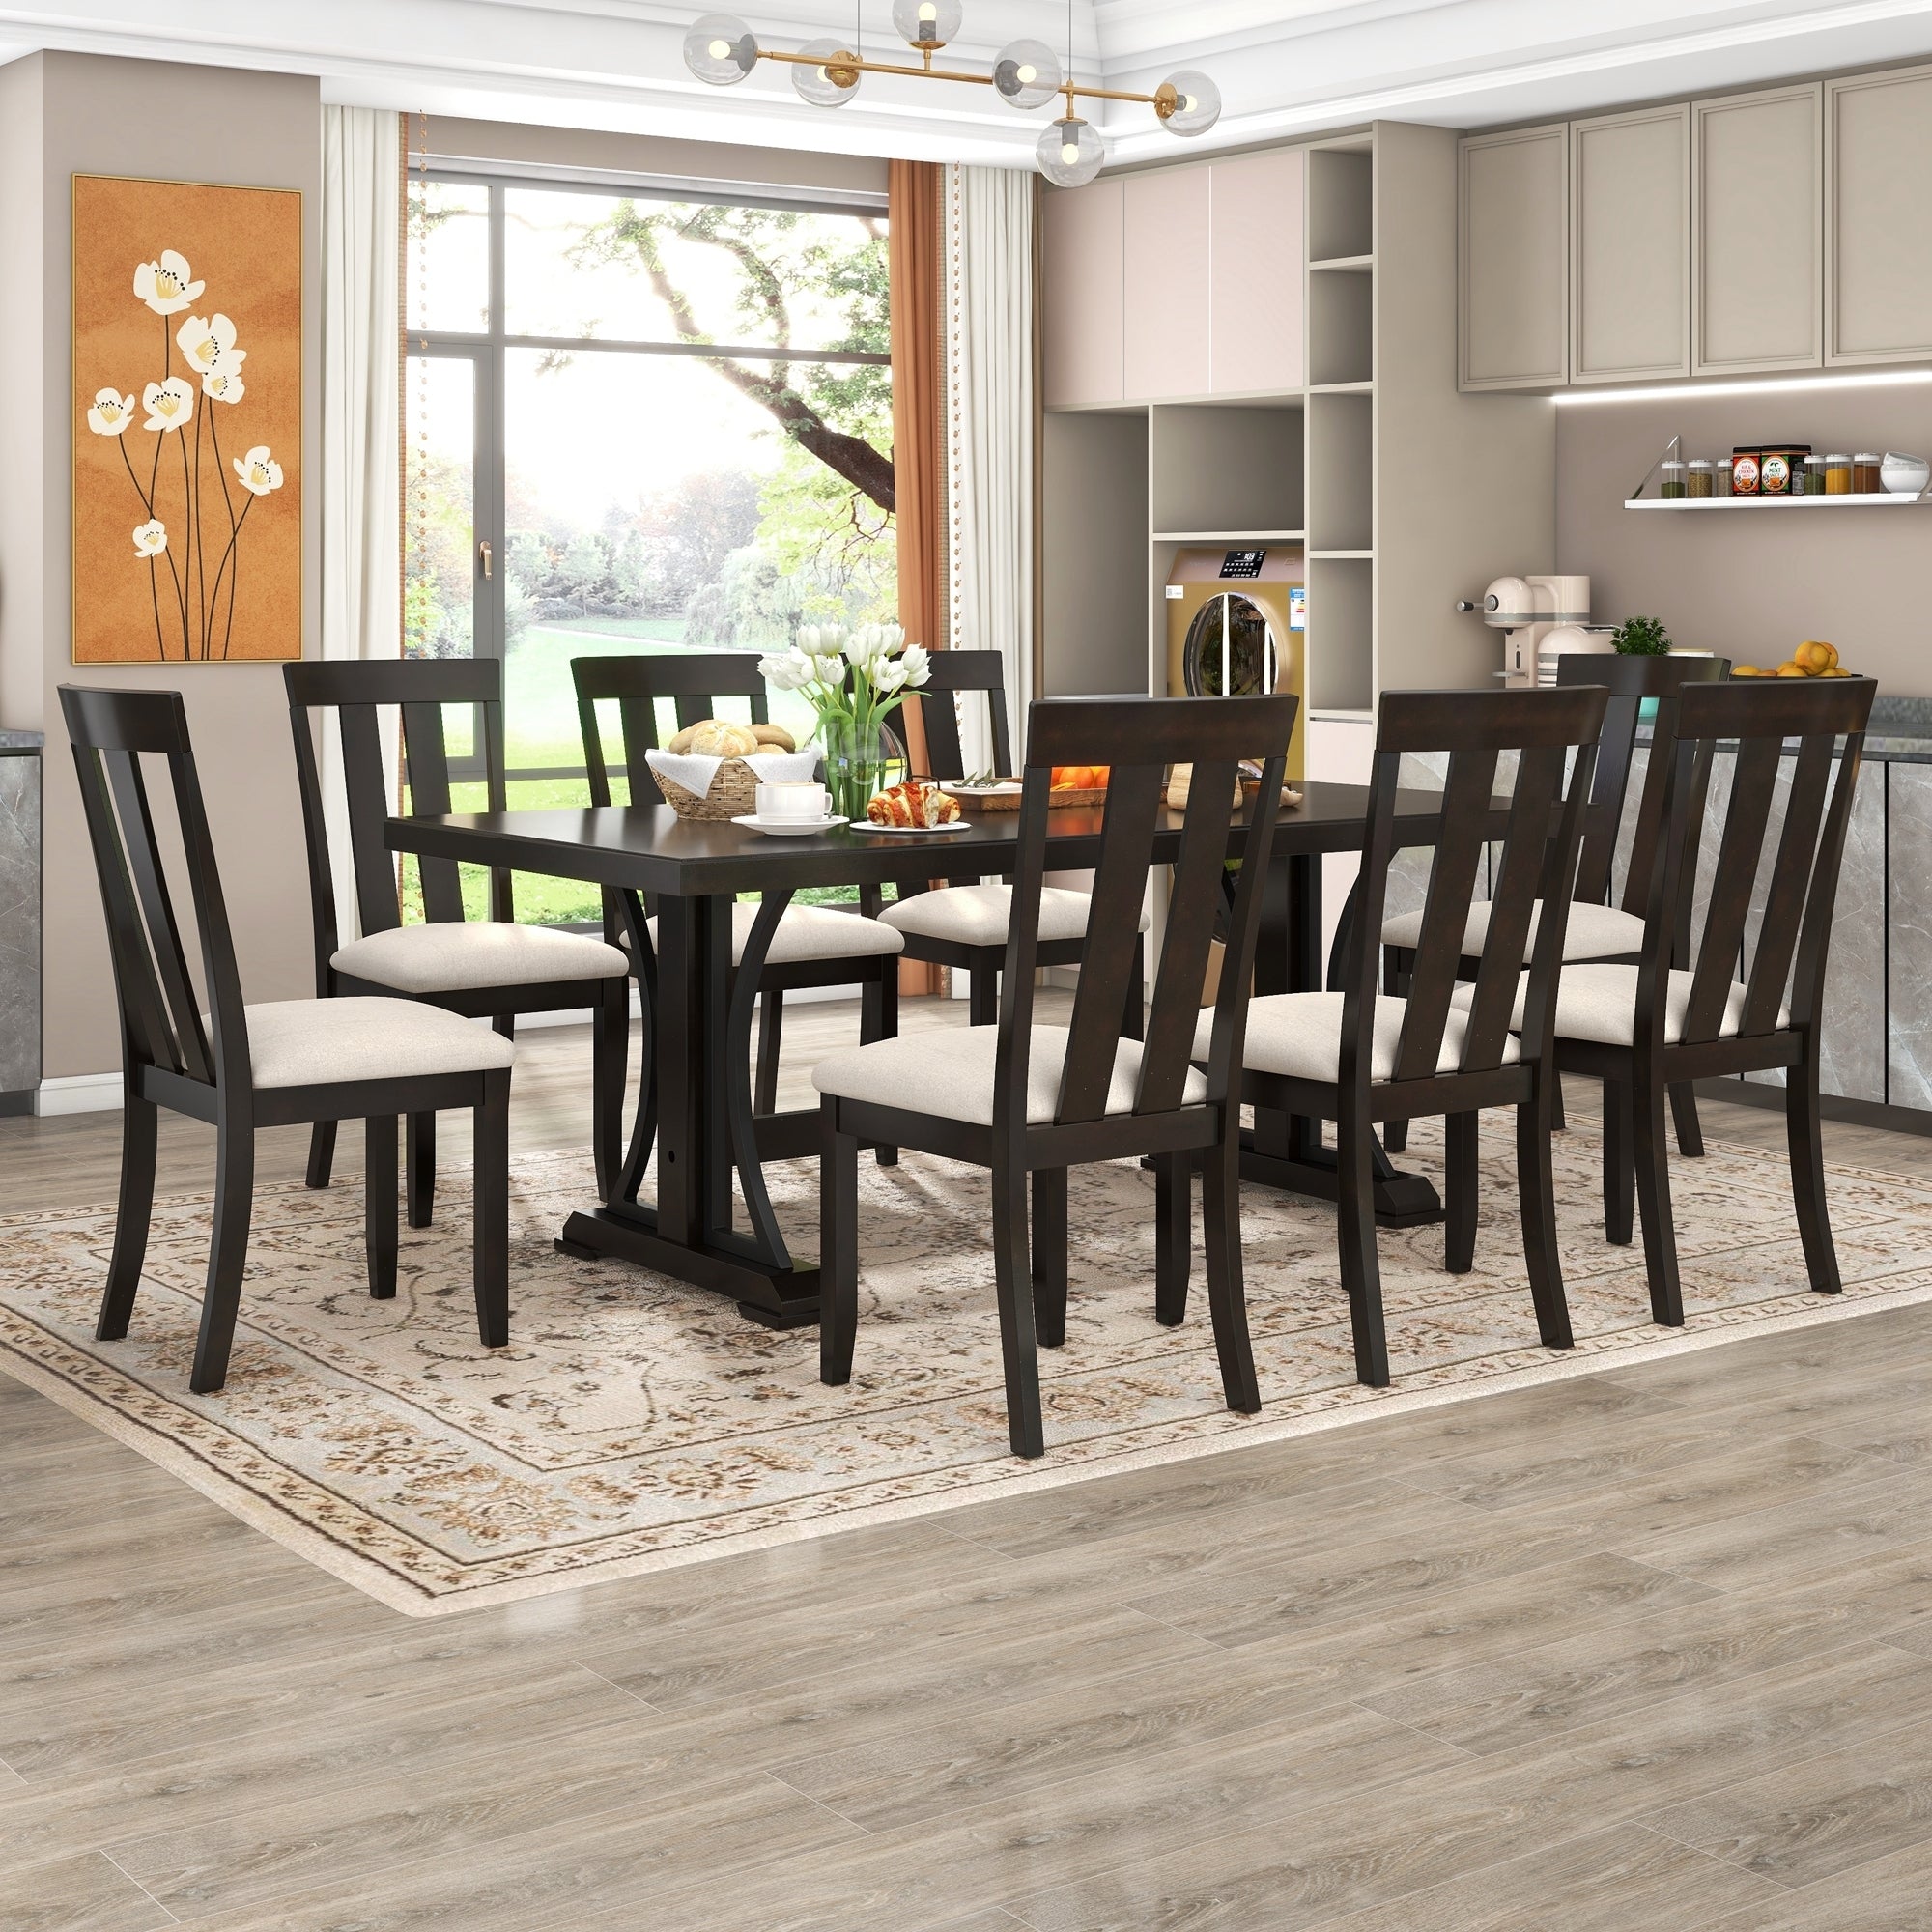 TREXM 9-Piece Set - 78" Wood Rectangular Dining Table and 8 Dining Room Chairs (Espresso)